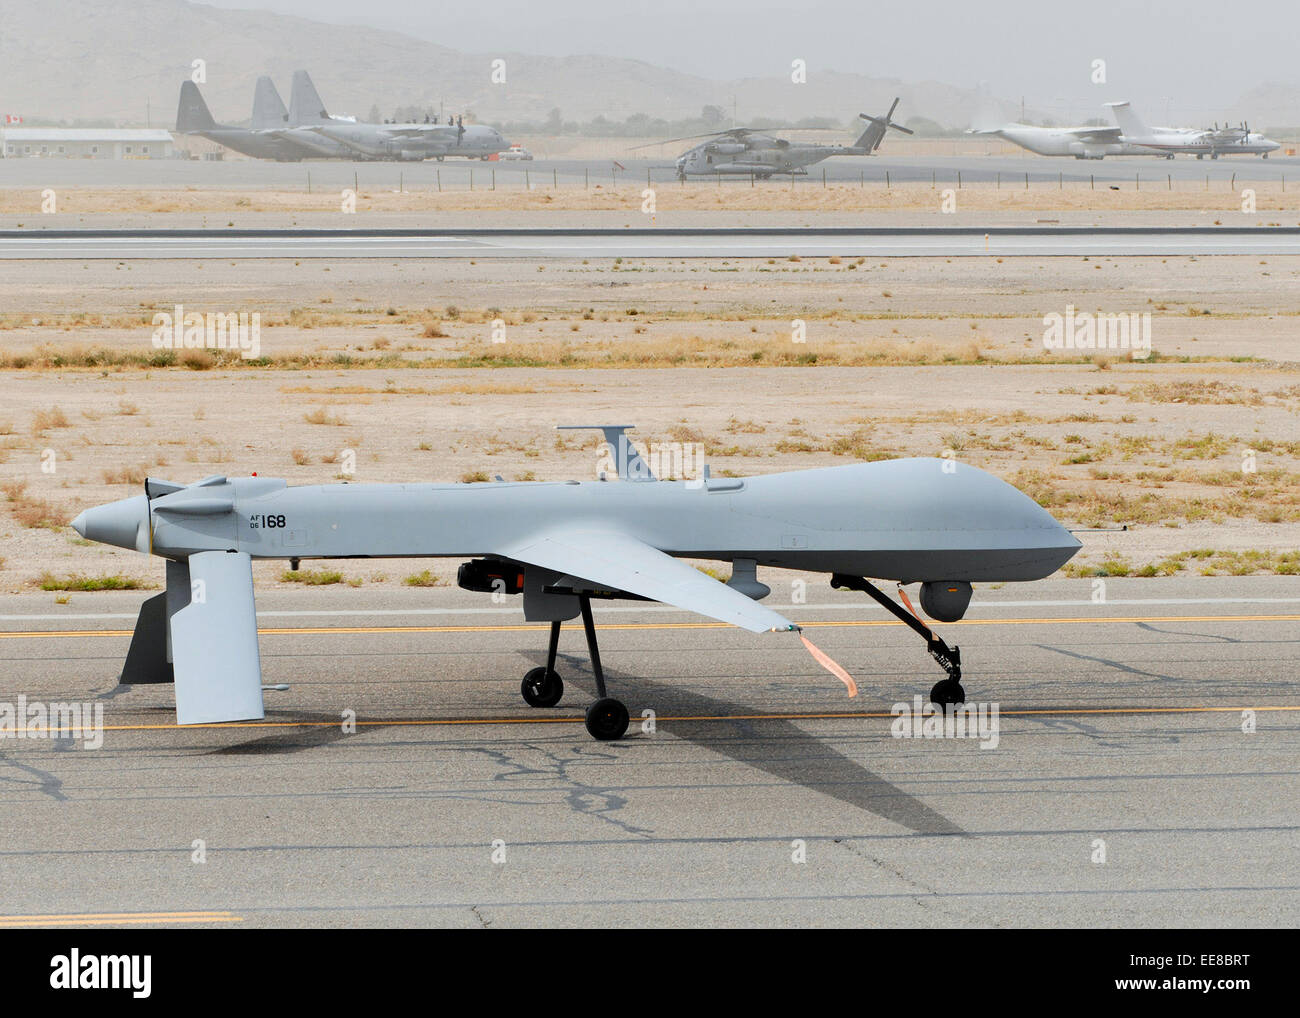 MQ-1 Predator unmanned aerial vehicle (UAV) on the runway at Bagram Air Base in Afghanistan, part of Operation Enduring Freedom. See description for more information. Stock Photo